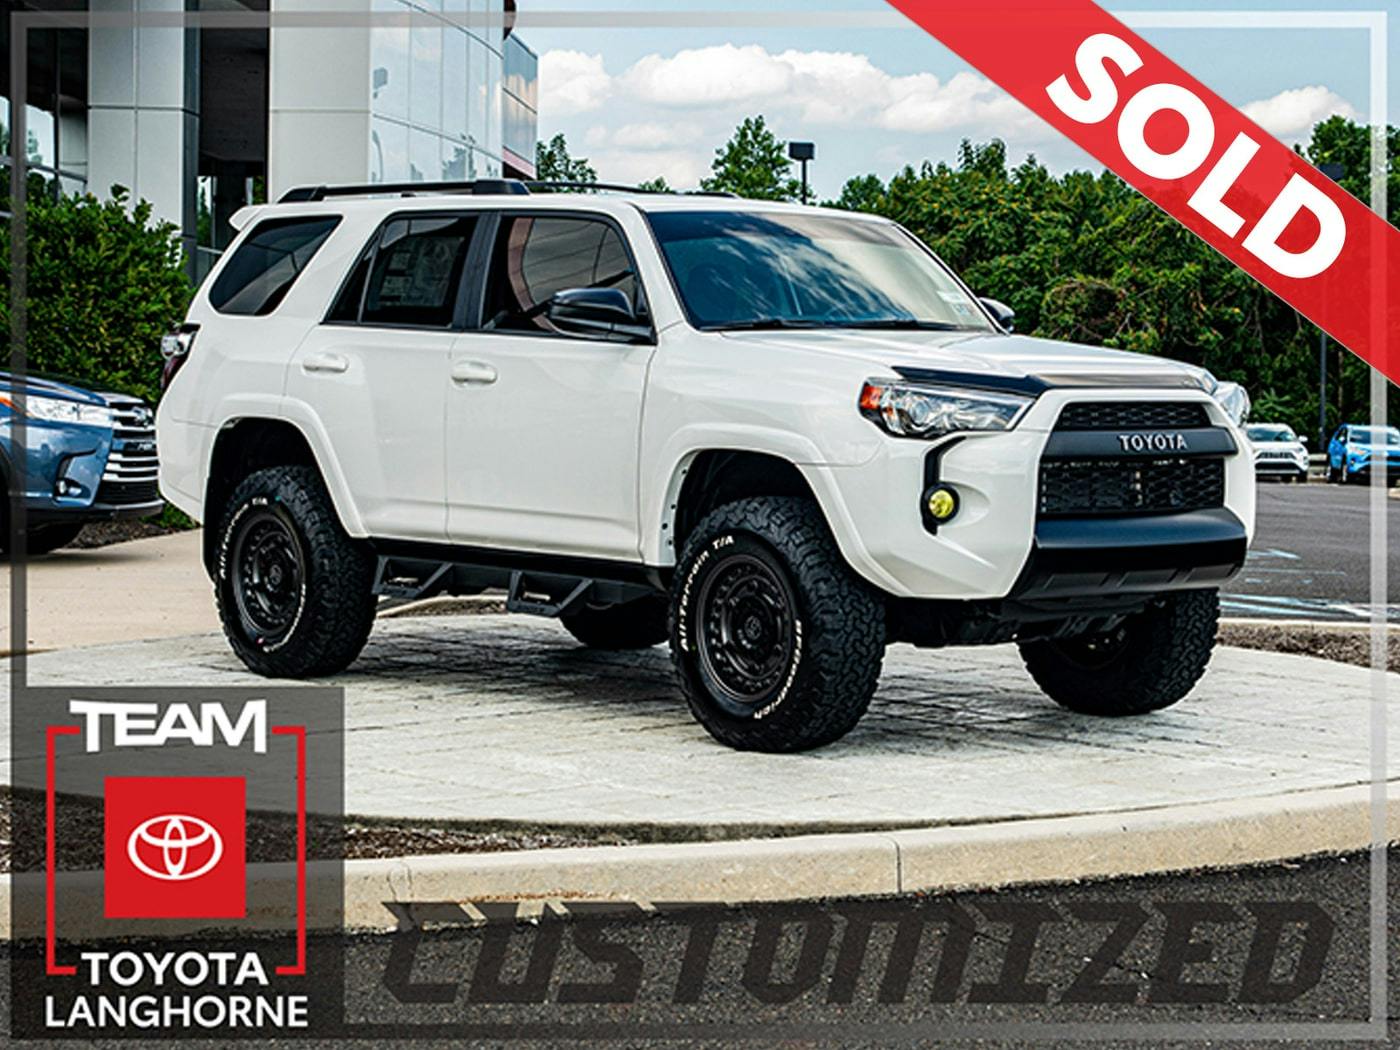 Team Toyota Customized New Vehicles listed 4 runner